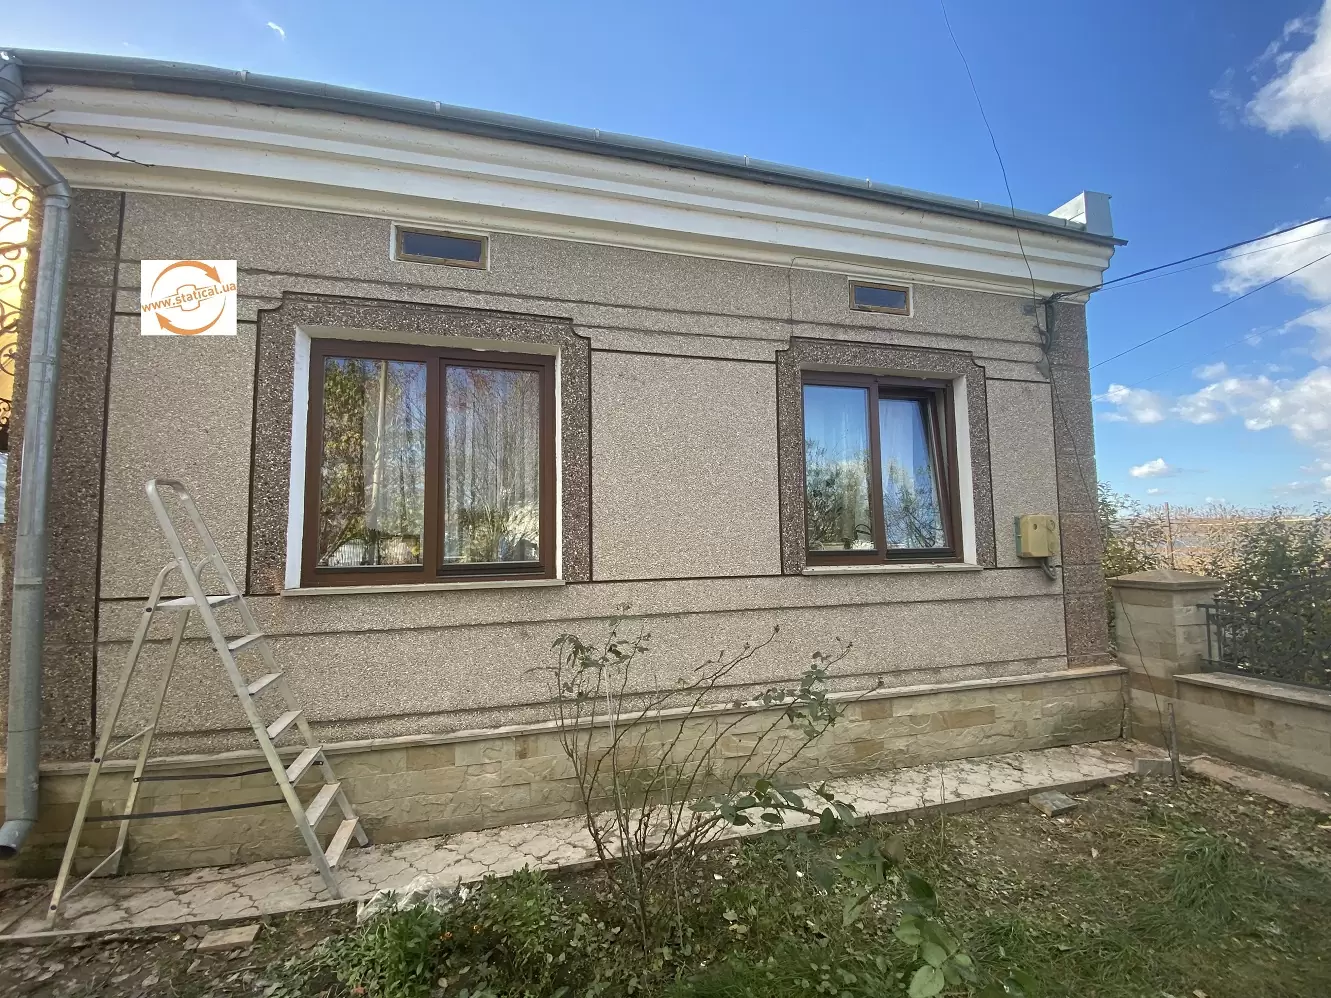 Private residential building from 12.10.2022, Ternopil region.